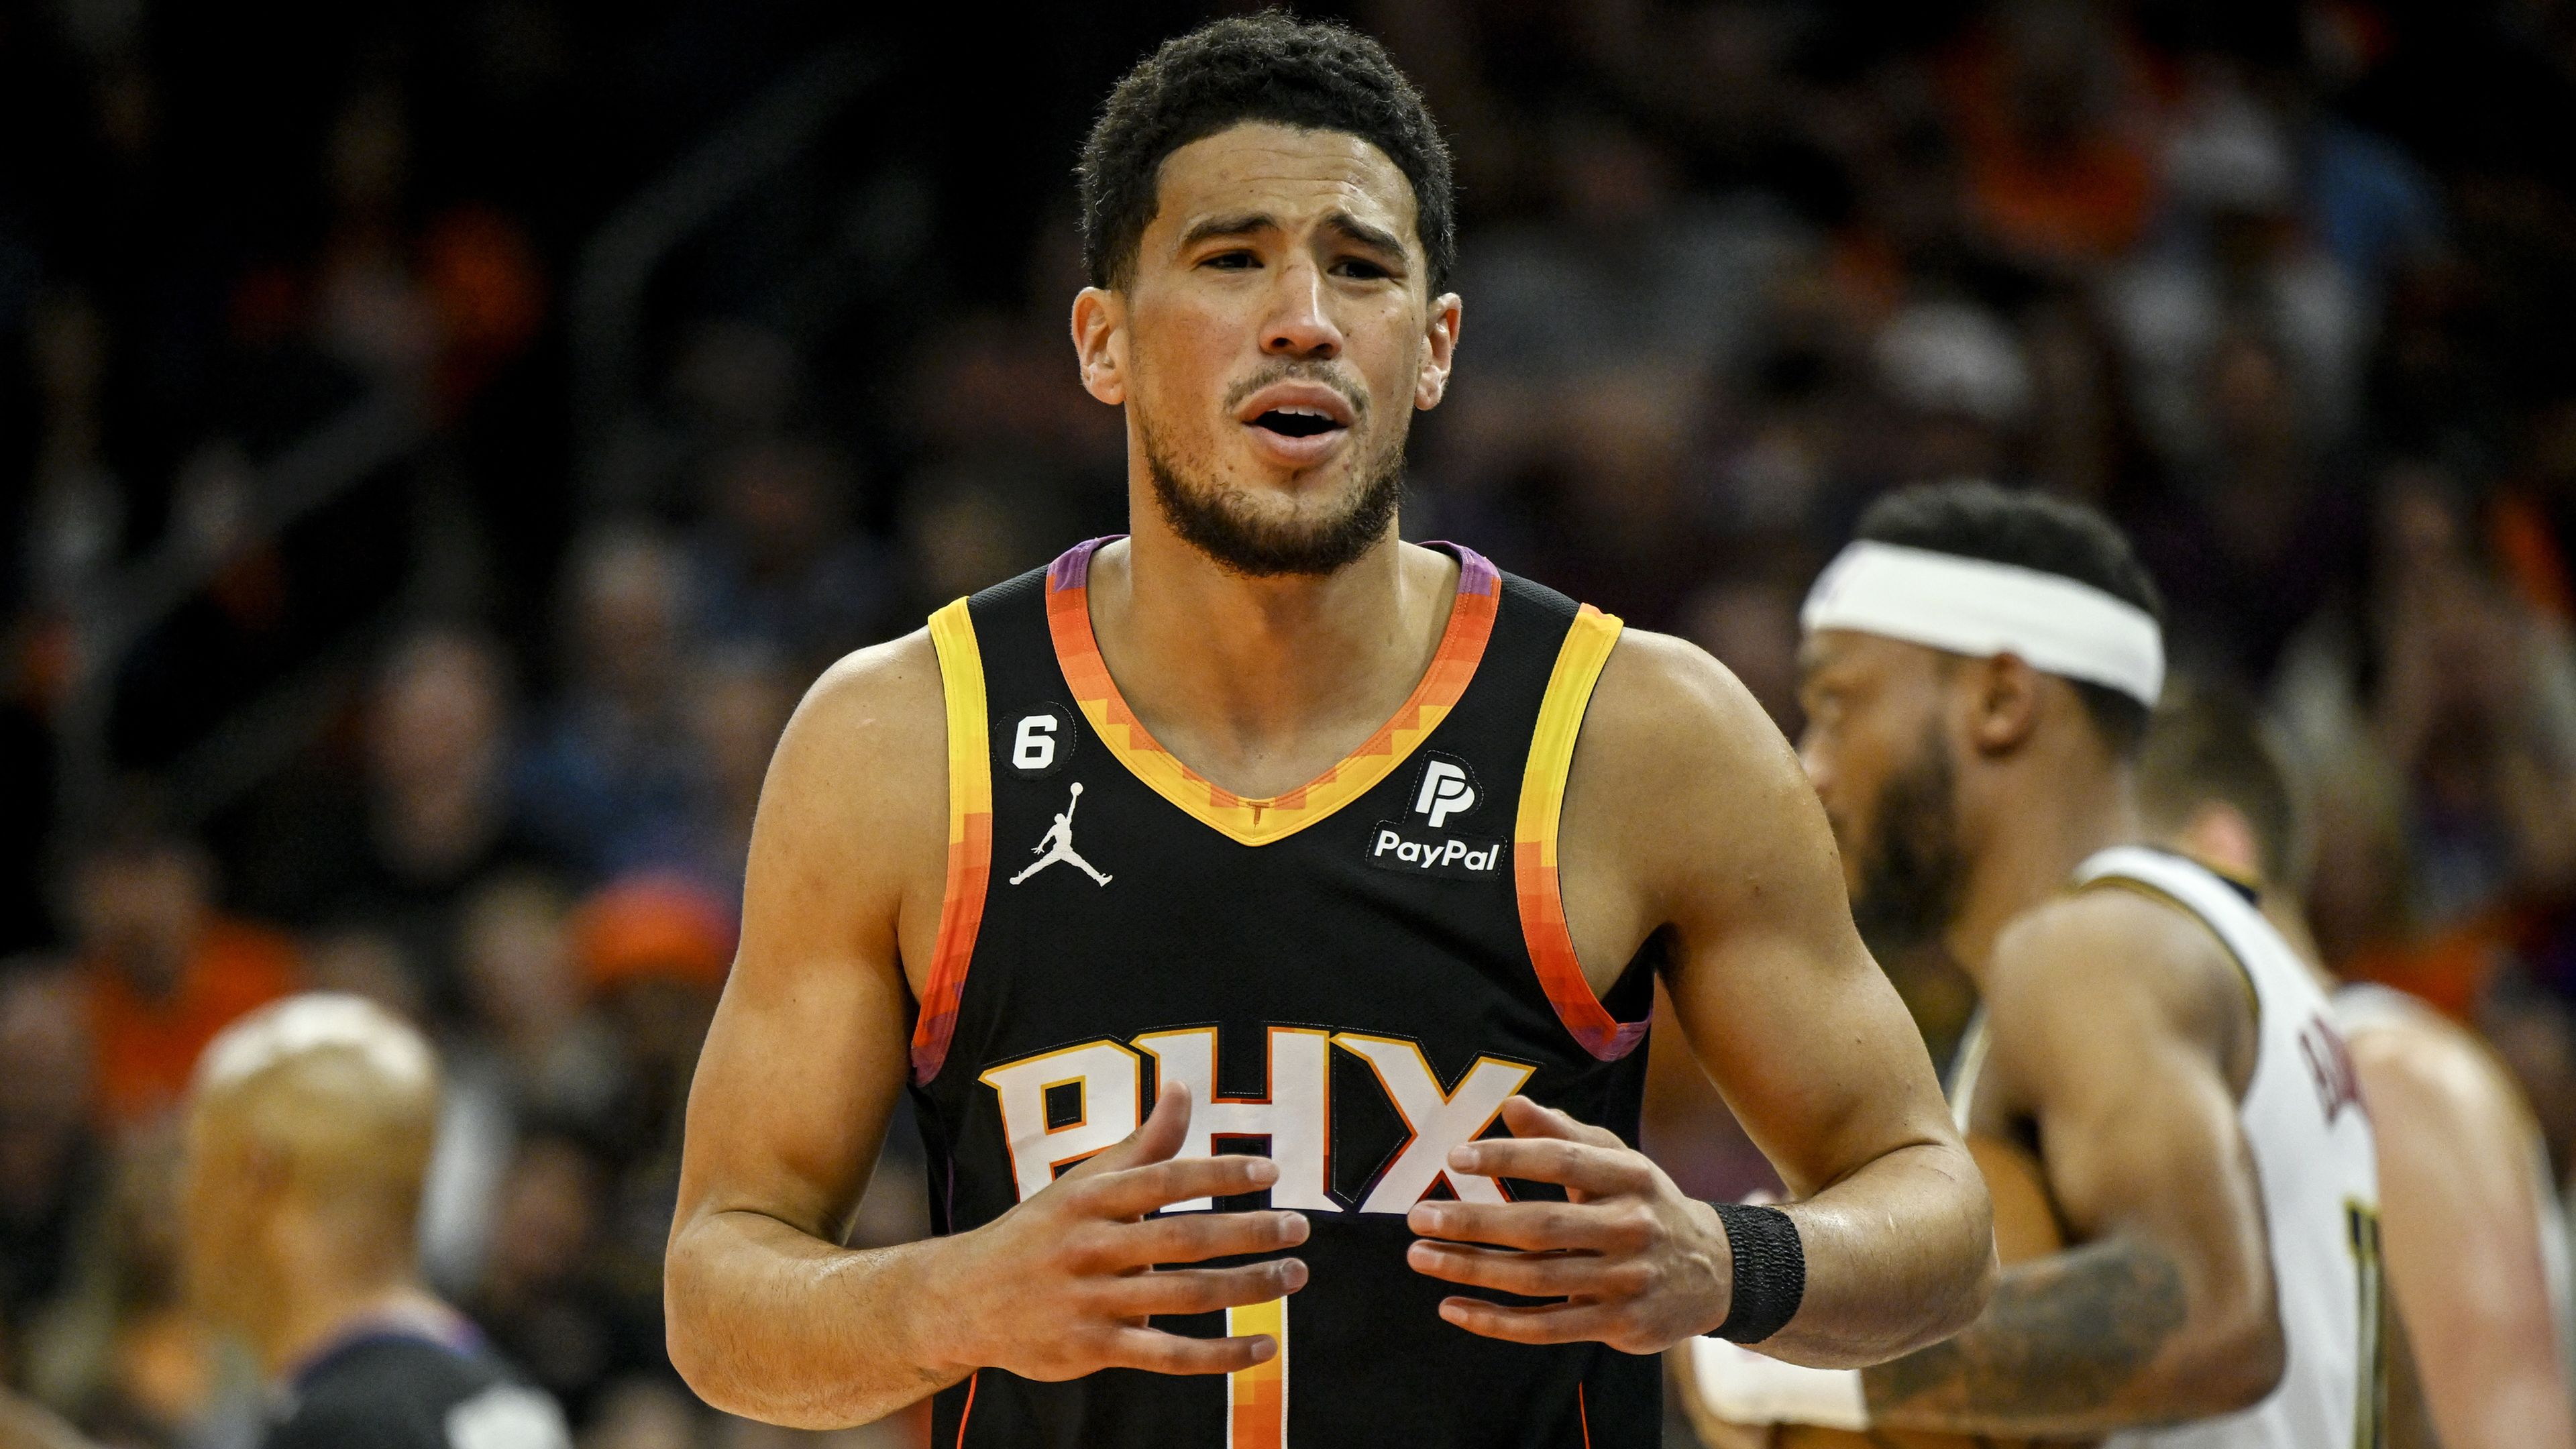 'Very uncharacteristic': Devin Booker ducks media after 'embarrassing' playoff elimination